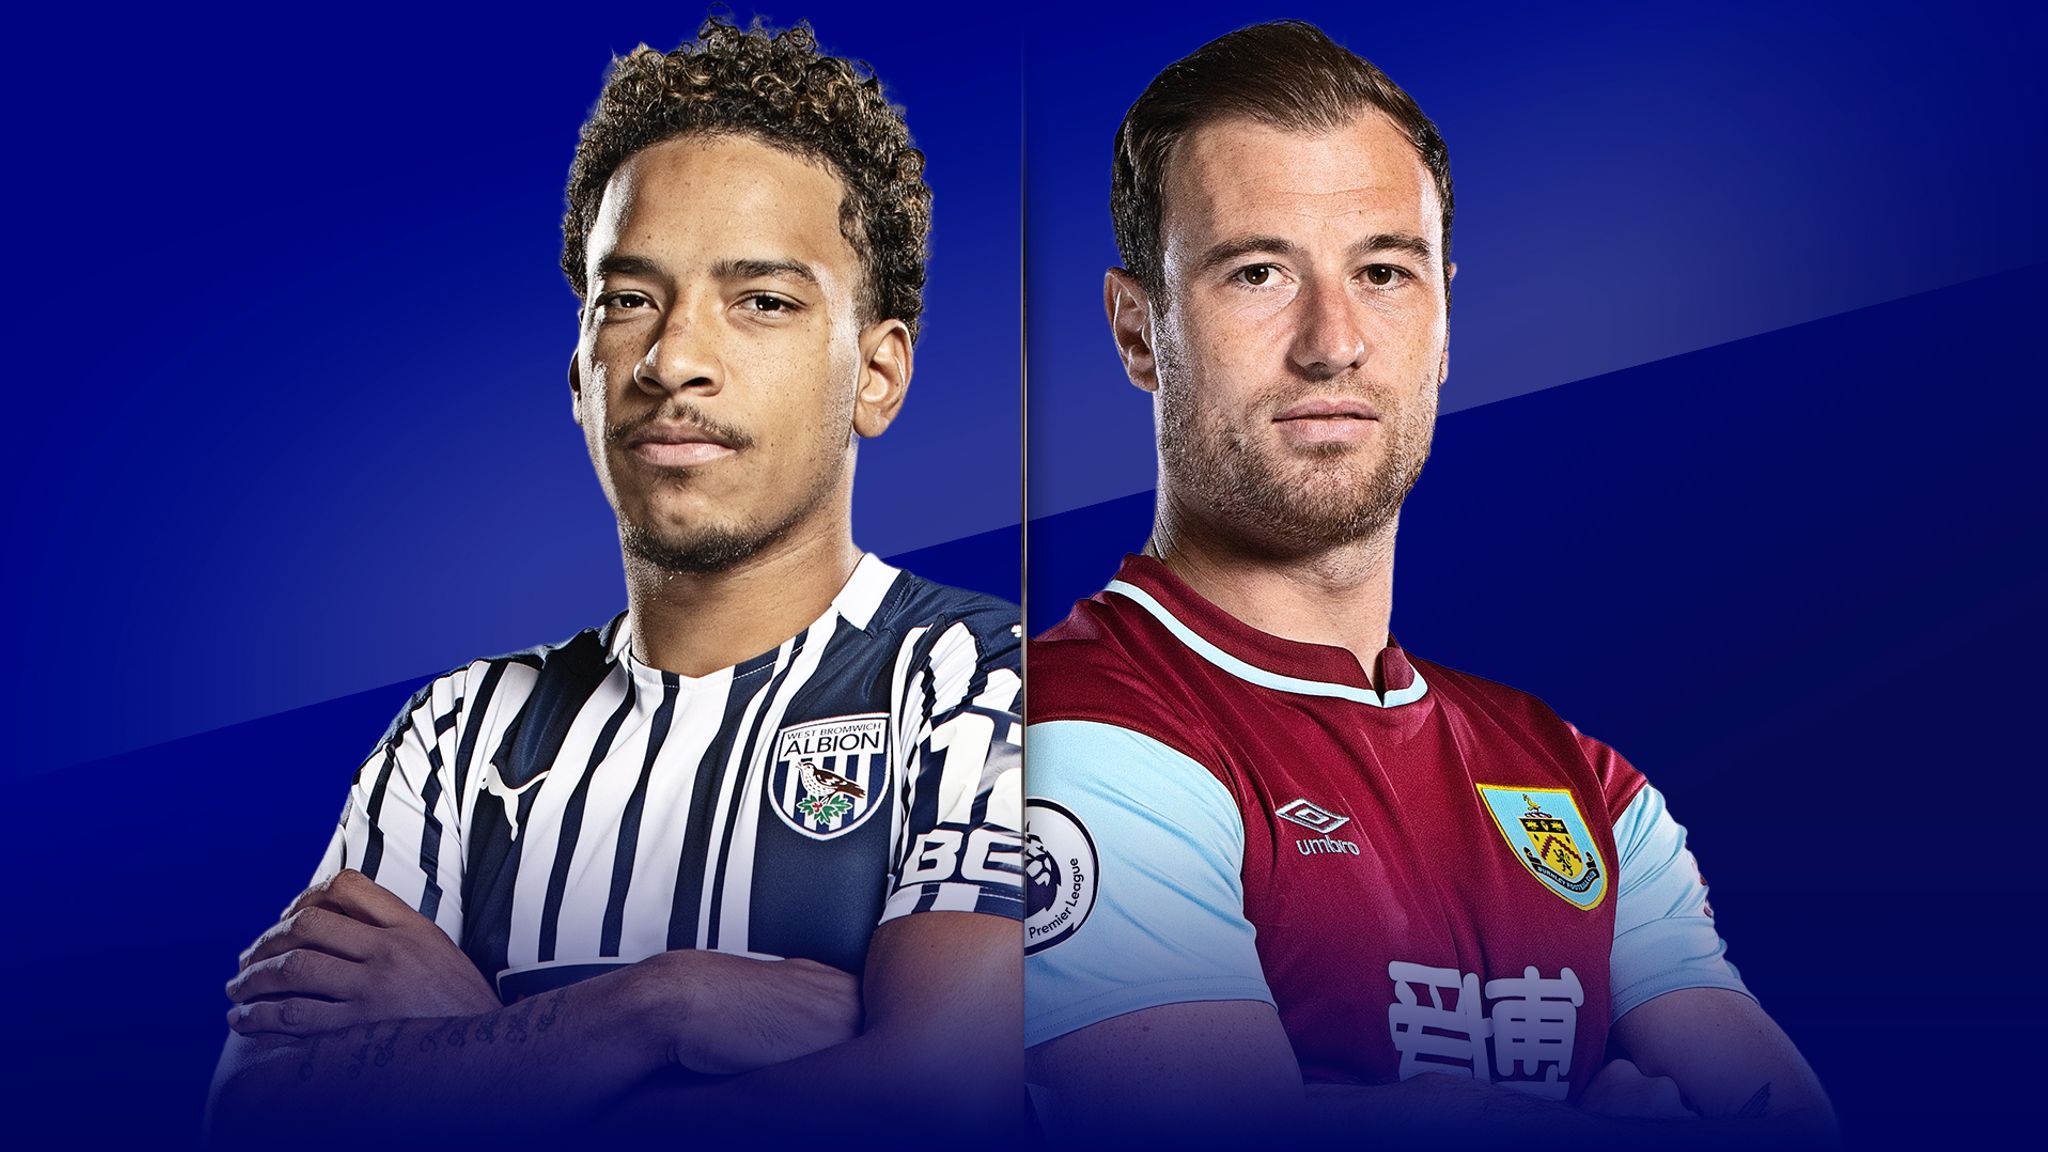 Live match preview - W Brom vs Burnley 19.10.2020